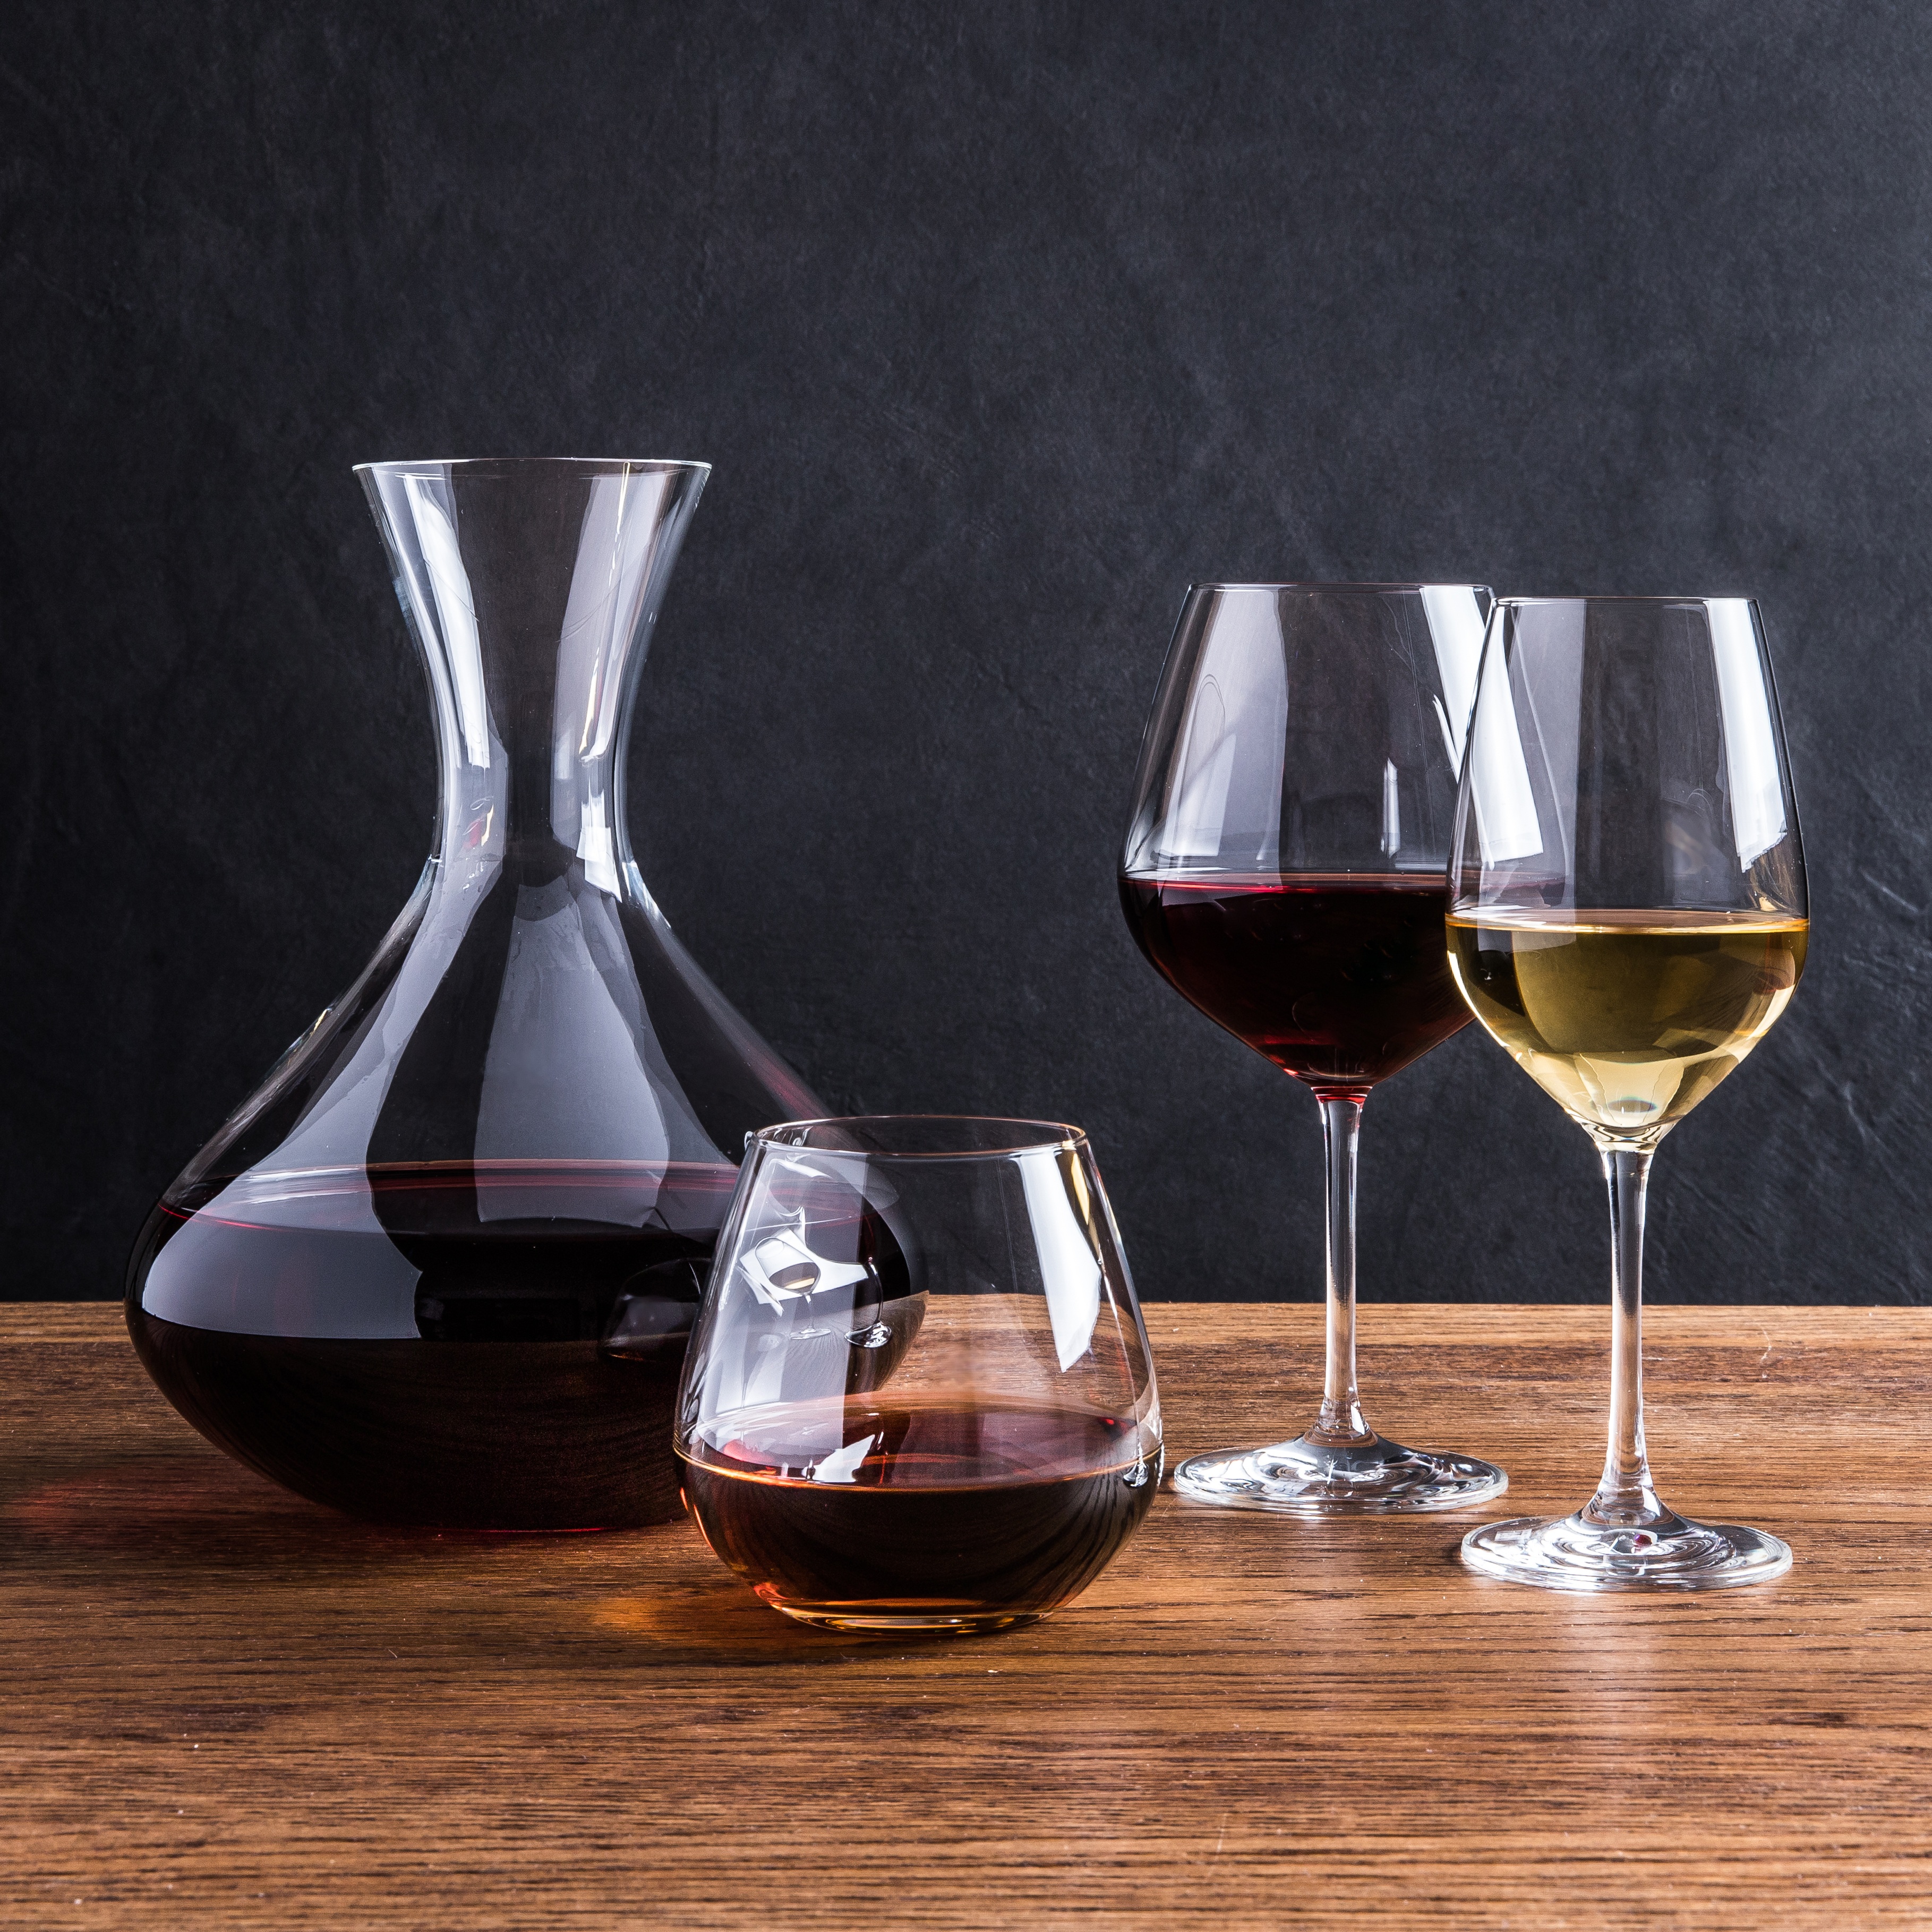 a wine decanter, stemless wine glass, red wine glass, and white wine glass filled with wine